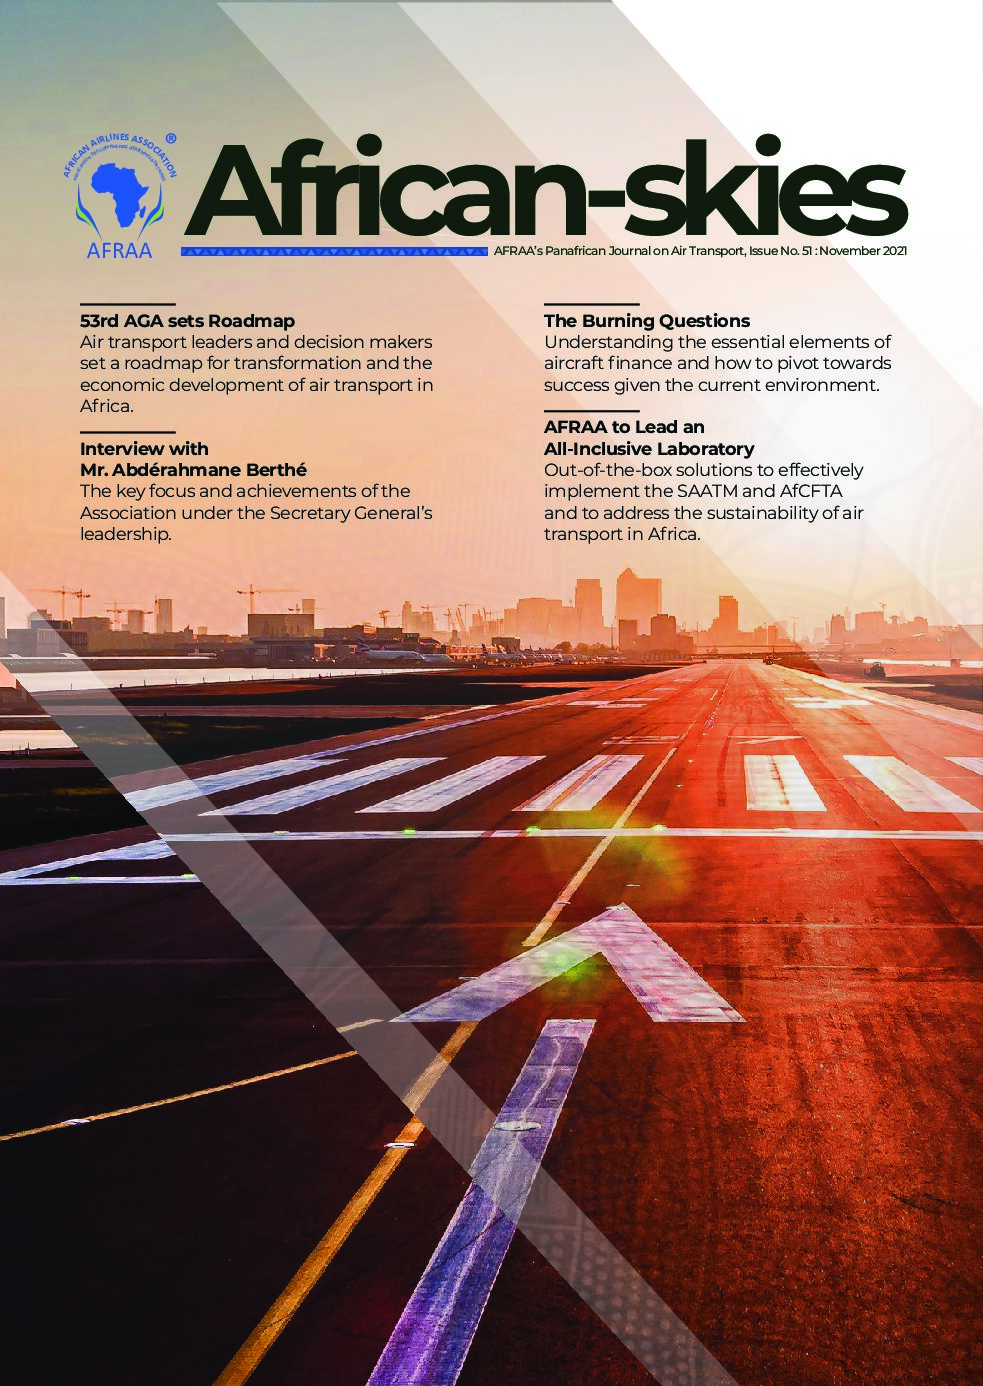 African Skies Issue No. 51